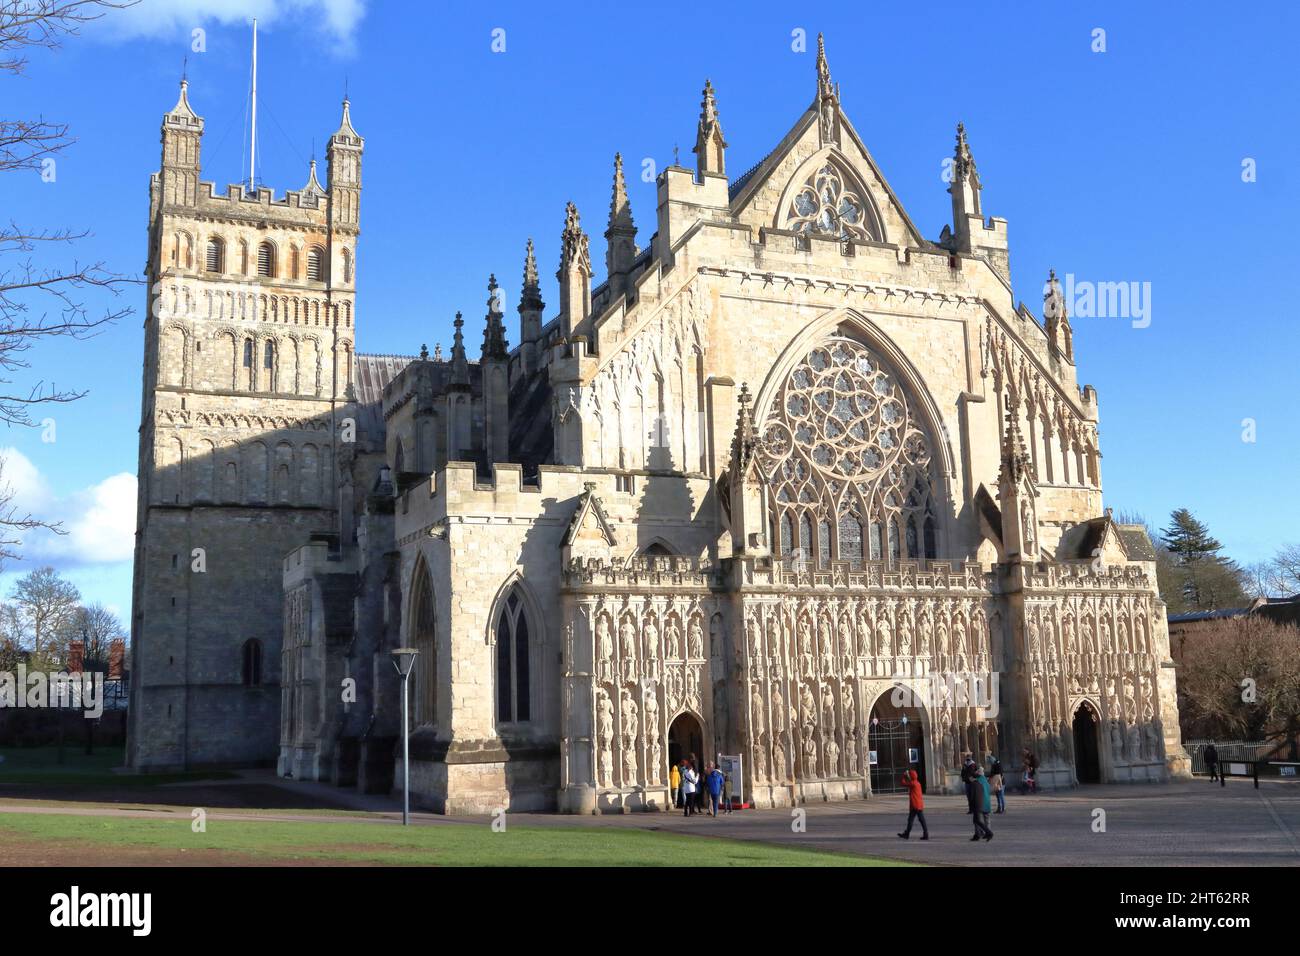 Exeter Cathdral - exterior front view Stock Photo